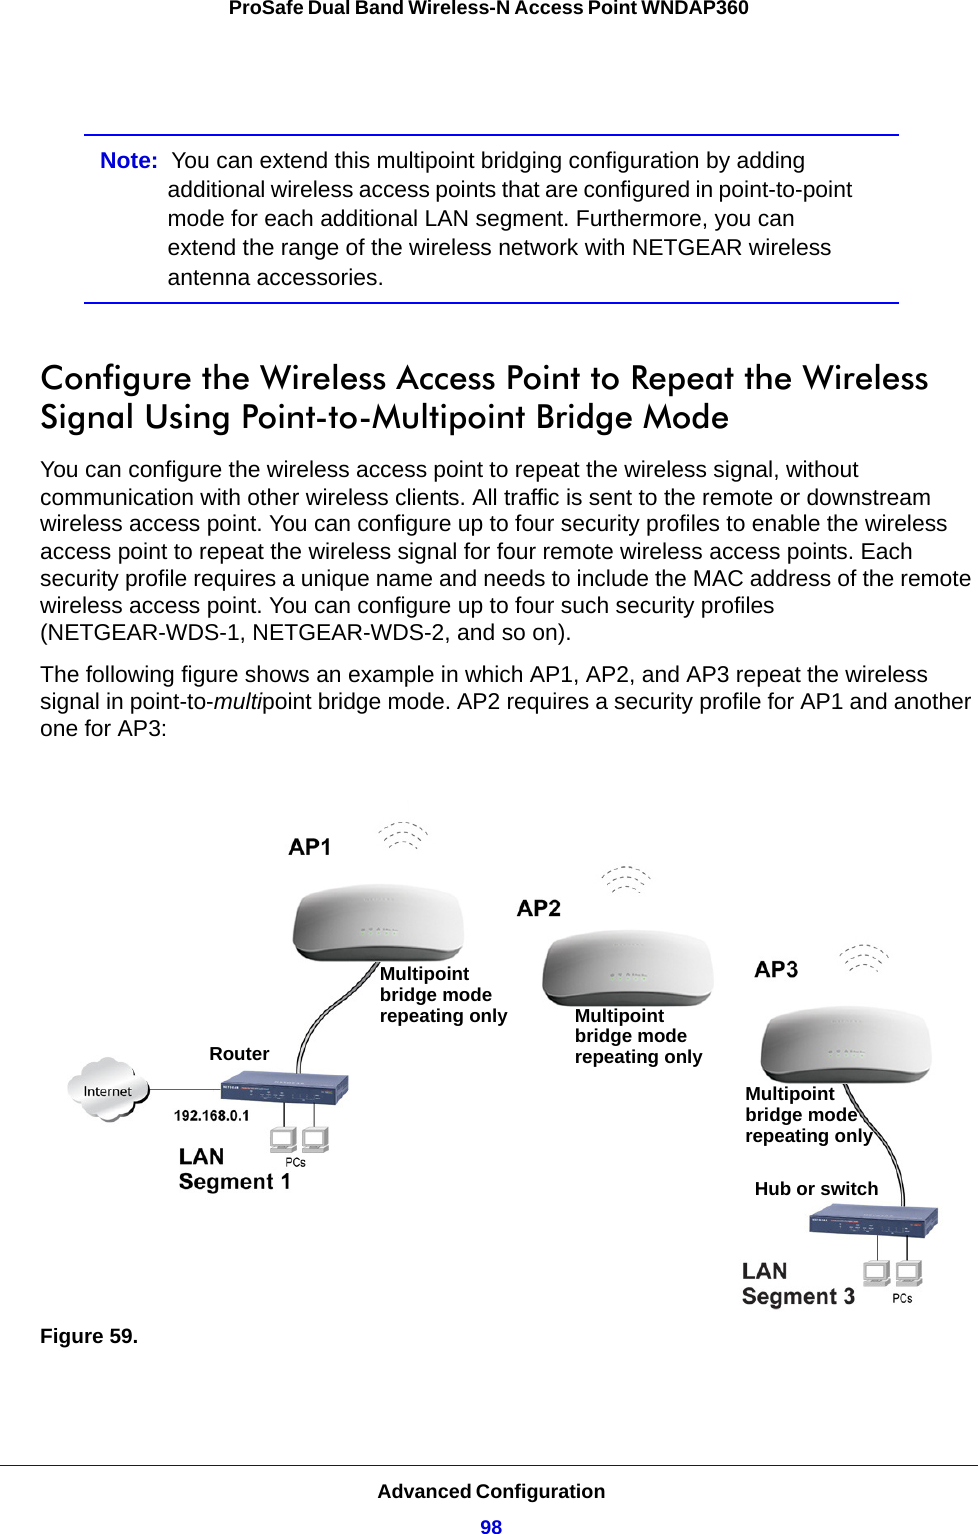 Advanced Configuration98ProSafe Dual Band Wireless-N Access Point WNDAP360 Note:  You can extend this multipoint bridging configuration by adding additional wireless access points that are configured in point-to-point mode for each additional LAN segment. Furthermore, you can extend the range of the wireless network with NETGEAR wireless antenna accessories.Configure the Wireless Access Point to Repeat the Wireless Signal Using Point-to-Multipoint Bridge ModeYou can configure the wireless access point to repeat the wireless signal, without communication with other wireless clients. All traffic is sent to the remote or downstream wireless access point. You can configure up to four security profiles to enable the wireless access point to repeat the wireless signal for four remote wireless access points. Each security profile requires a unique name and needs to include the MAC address of the remote wireless access point. You can configure up to four such security profiles (NETGEAR-WDS-1, NETGEAR-WDS-2, and so on).The following figure shows an example in which AP1, AP2, and AP3 repeat the wireless signal in point-to-multipoint bridge mode. AP2 requires a security profile for AP1 and another one for AP3:Figure 59. MultipointRouterHub or switchbridge moderepeating onlyMultipointbridge moderepeating onlyMultipointbridge moderepeating only